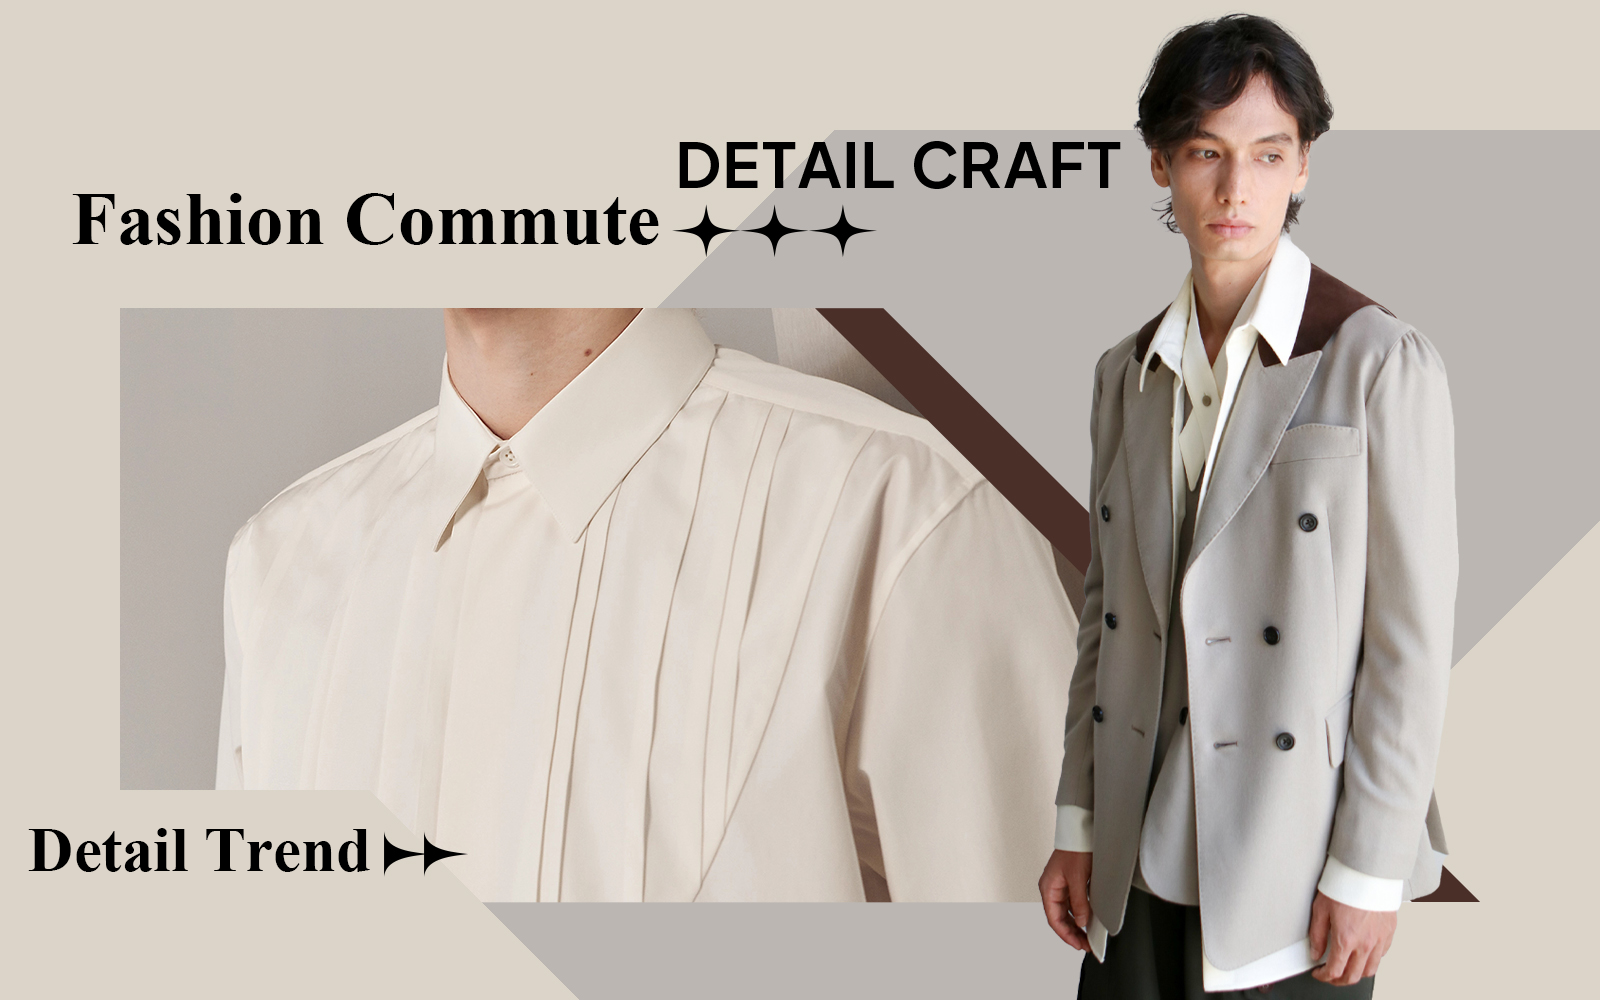 Fashion Commute -- The Detail & Craft Trend for Menswear